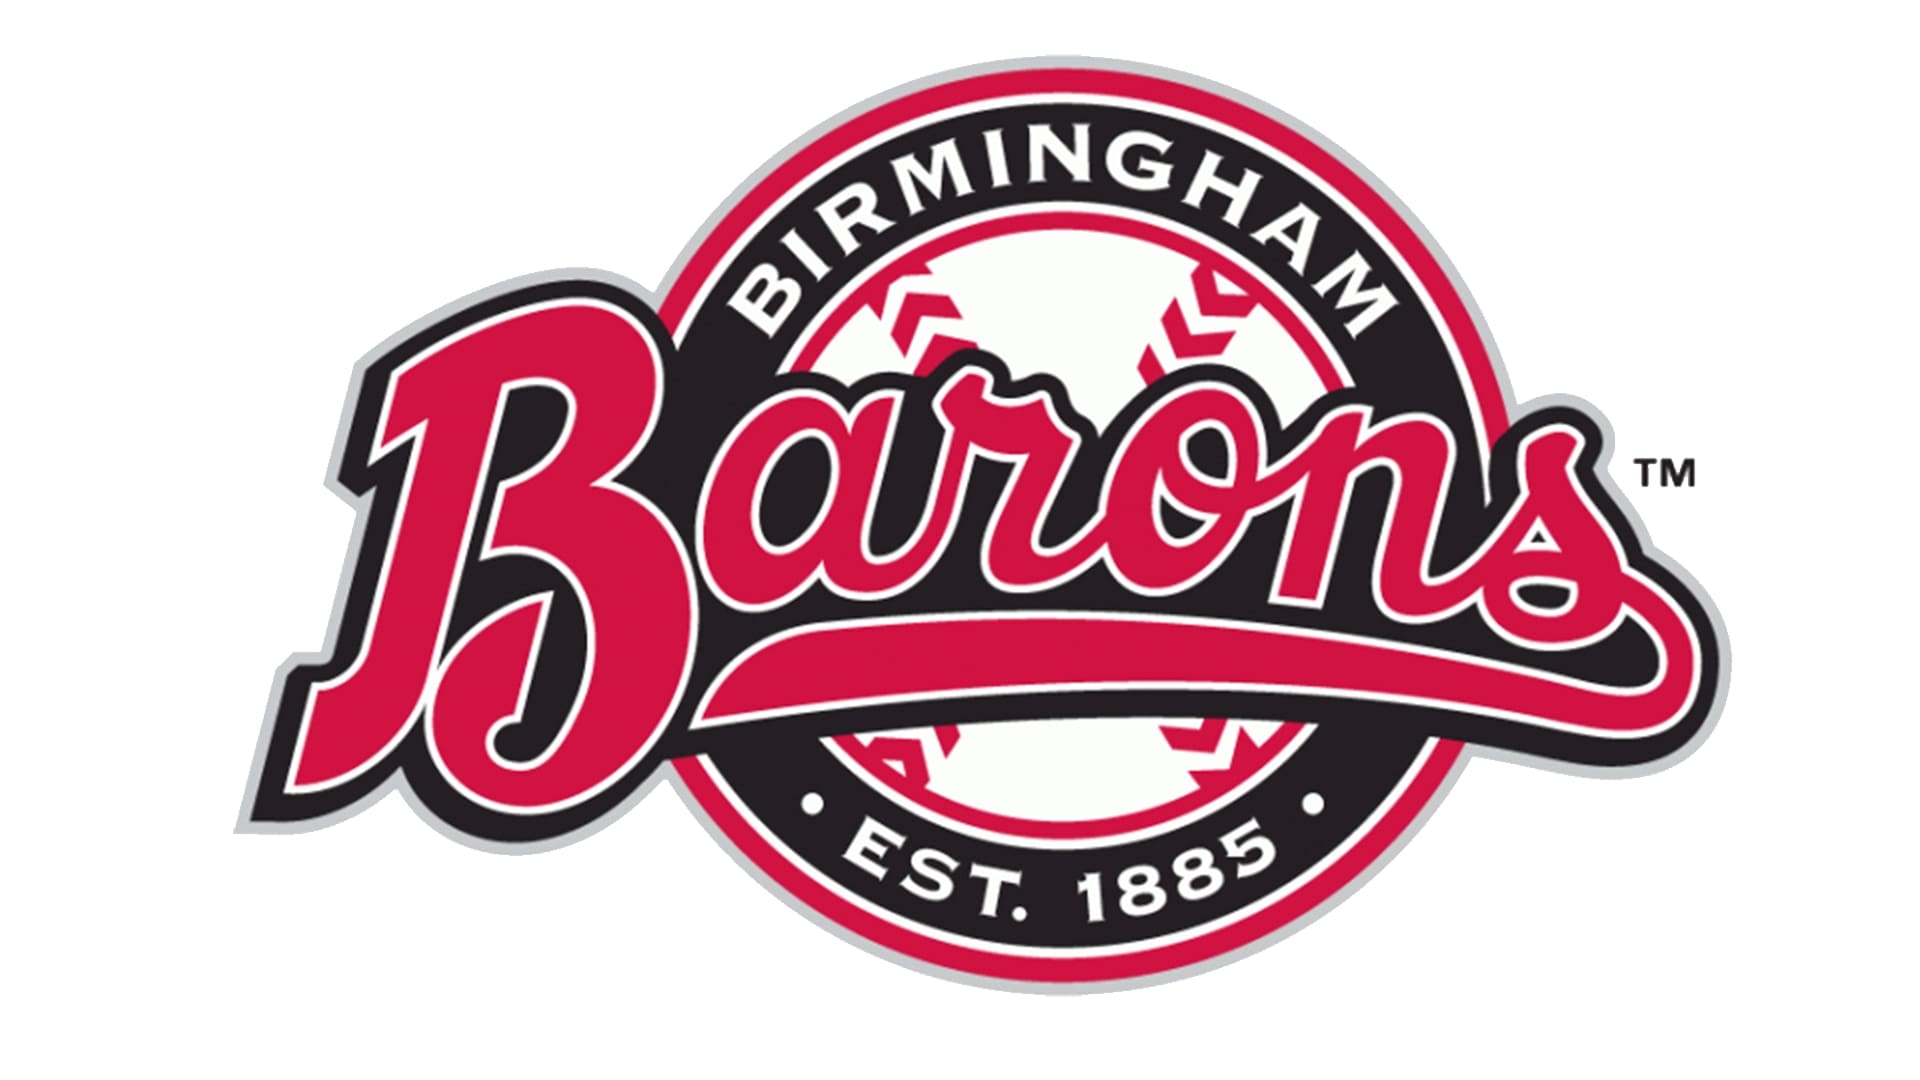 In my opinion, the Birmingham Barons have the best logo and